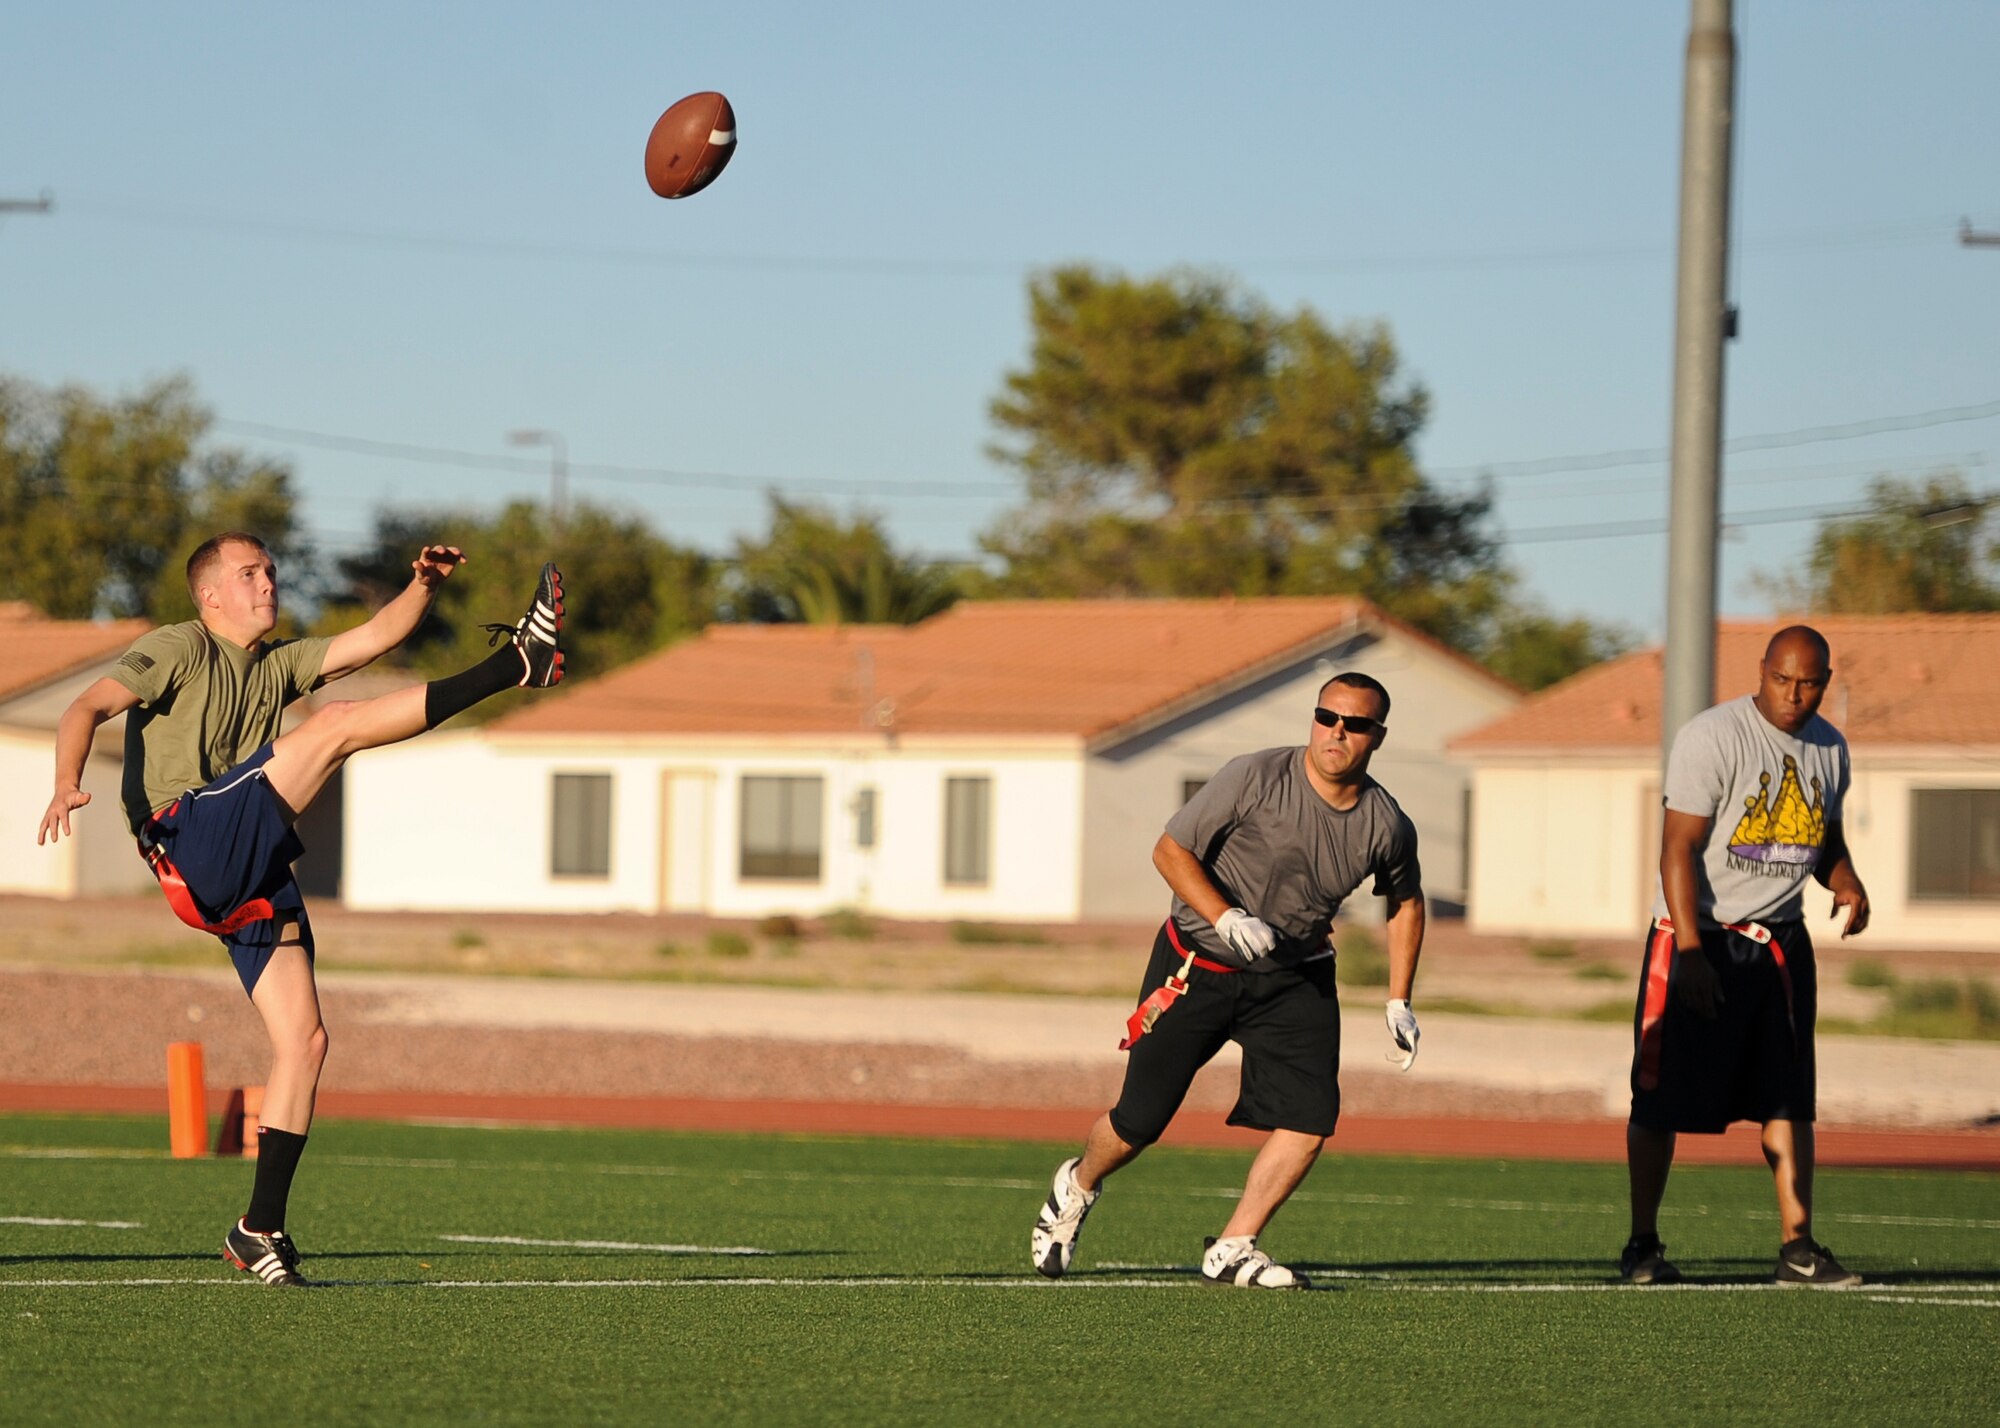 A member of the 757th Aircraft Maintenance Squadron’s Thunder team punts the ball during a game against the 757th AMXS’ Flanker team during a game at Nellis Air Force Base, Nev., Oct. 6, 2014. Flag football games are played Monday through Thursday on the football field behind the Warrior Fitness Center. (U.S. Air Force photo by Airman 1st Class Mikaley Towle)